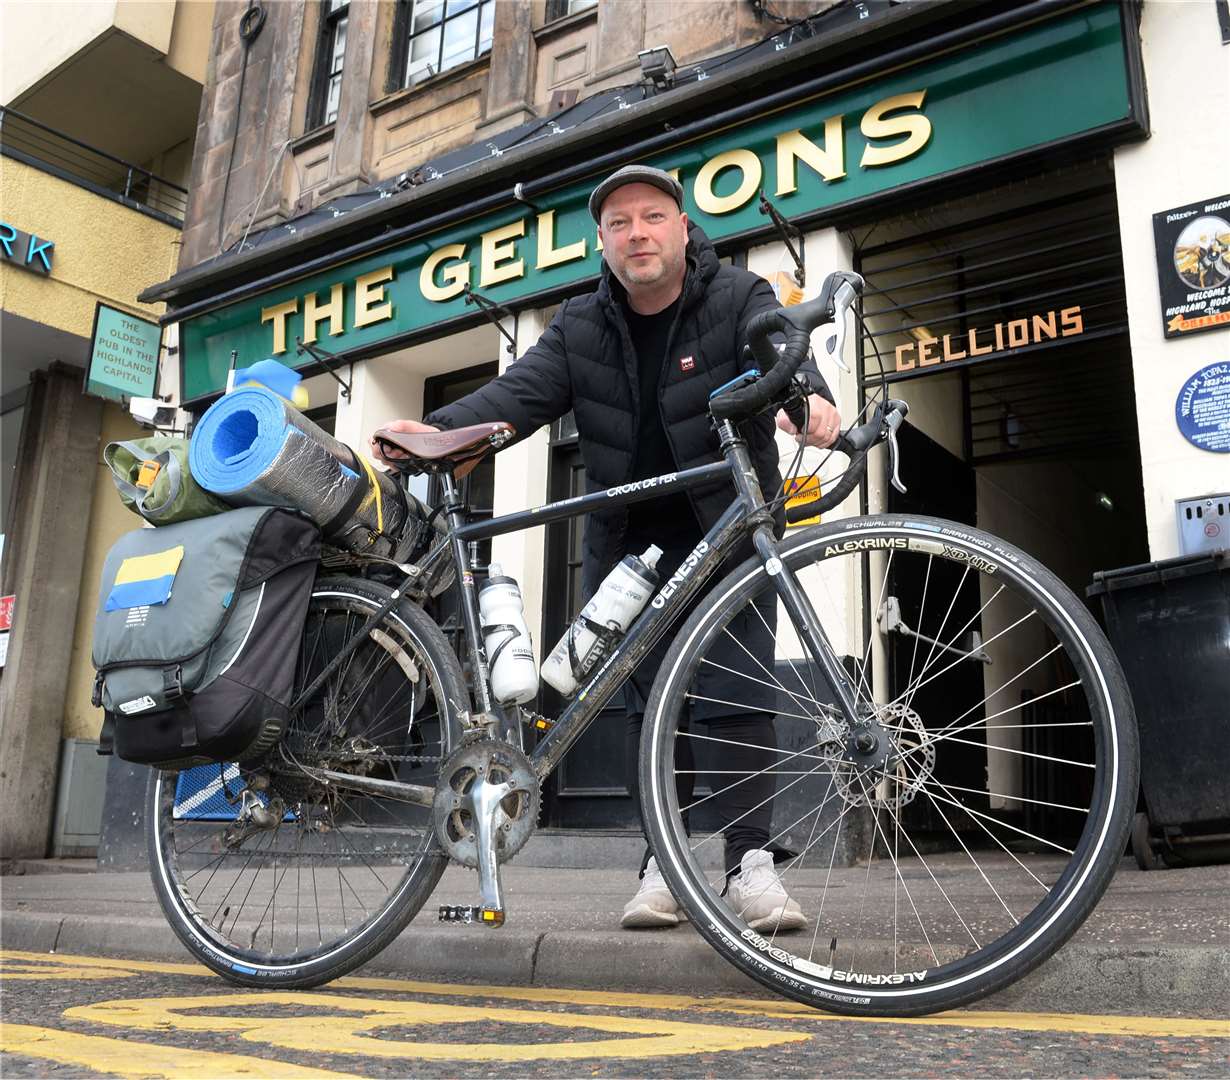 Alasdair Fraser cycled from Gdansk to The Gellions in aid of Ukrainian refugees.